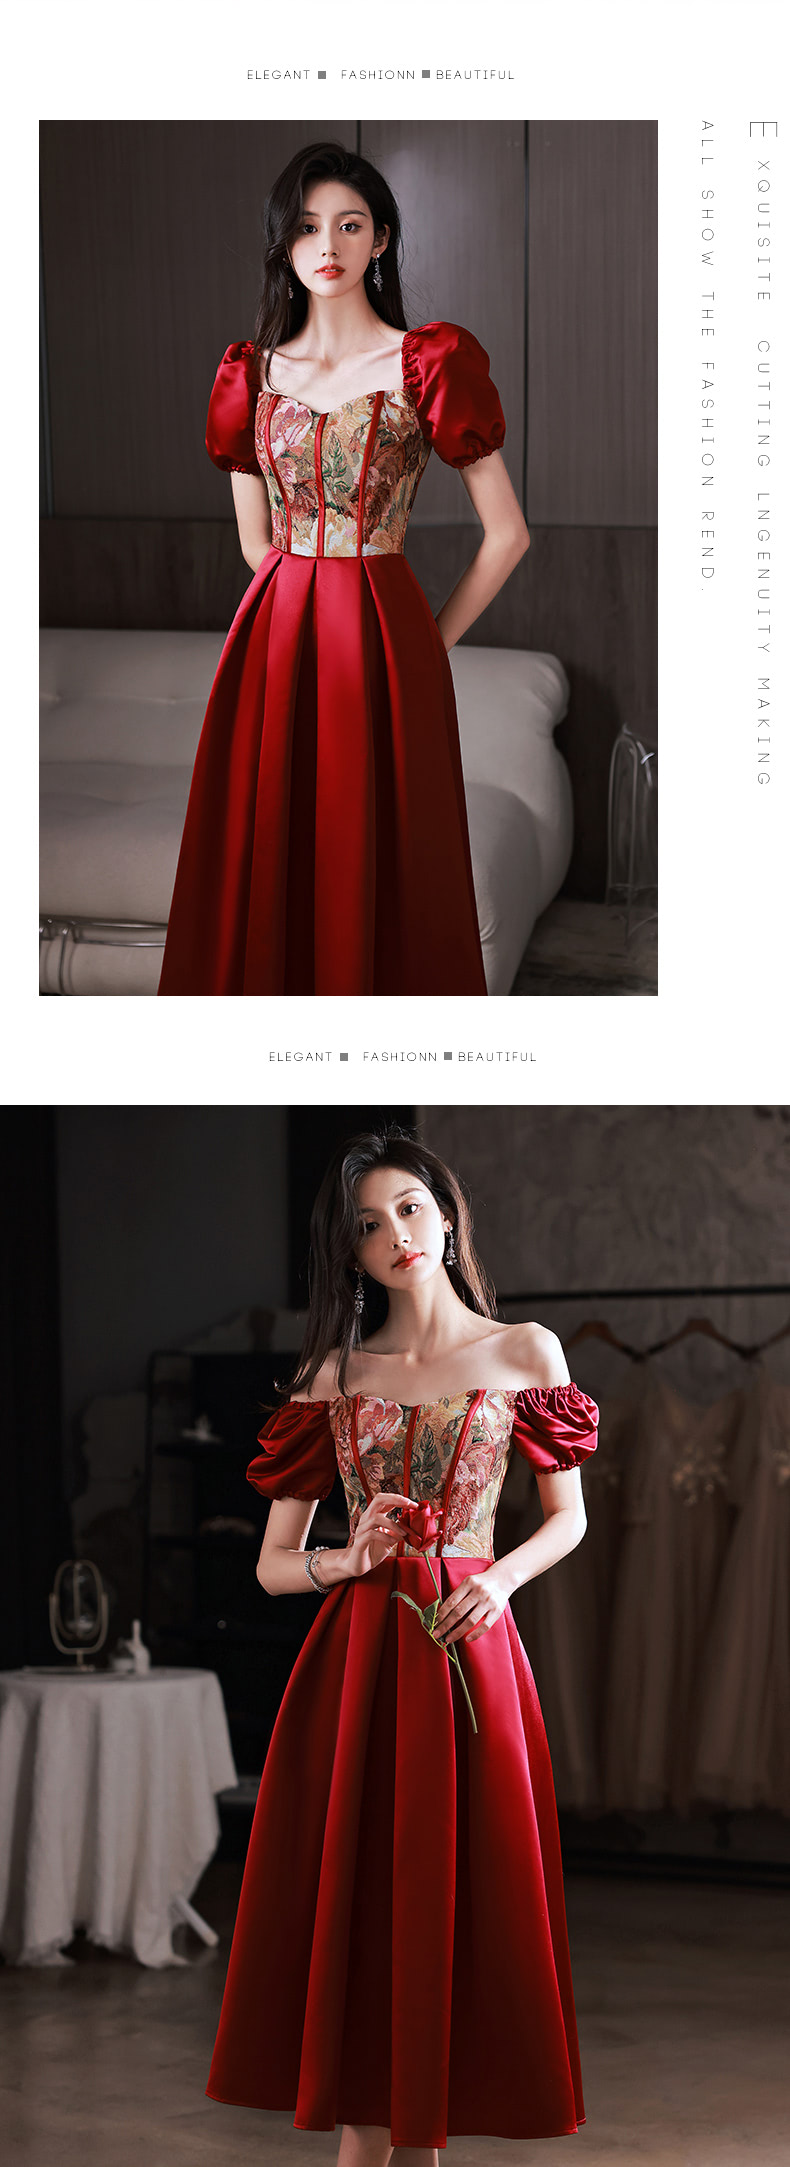 Unique-Vintage-Floral-Evening-Wine-Red-Party-Midi-Dress-with-Sleeves10.jpg